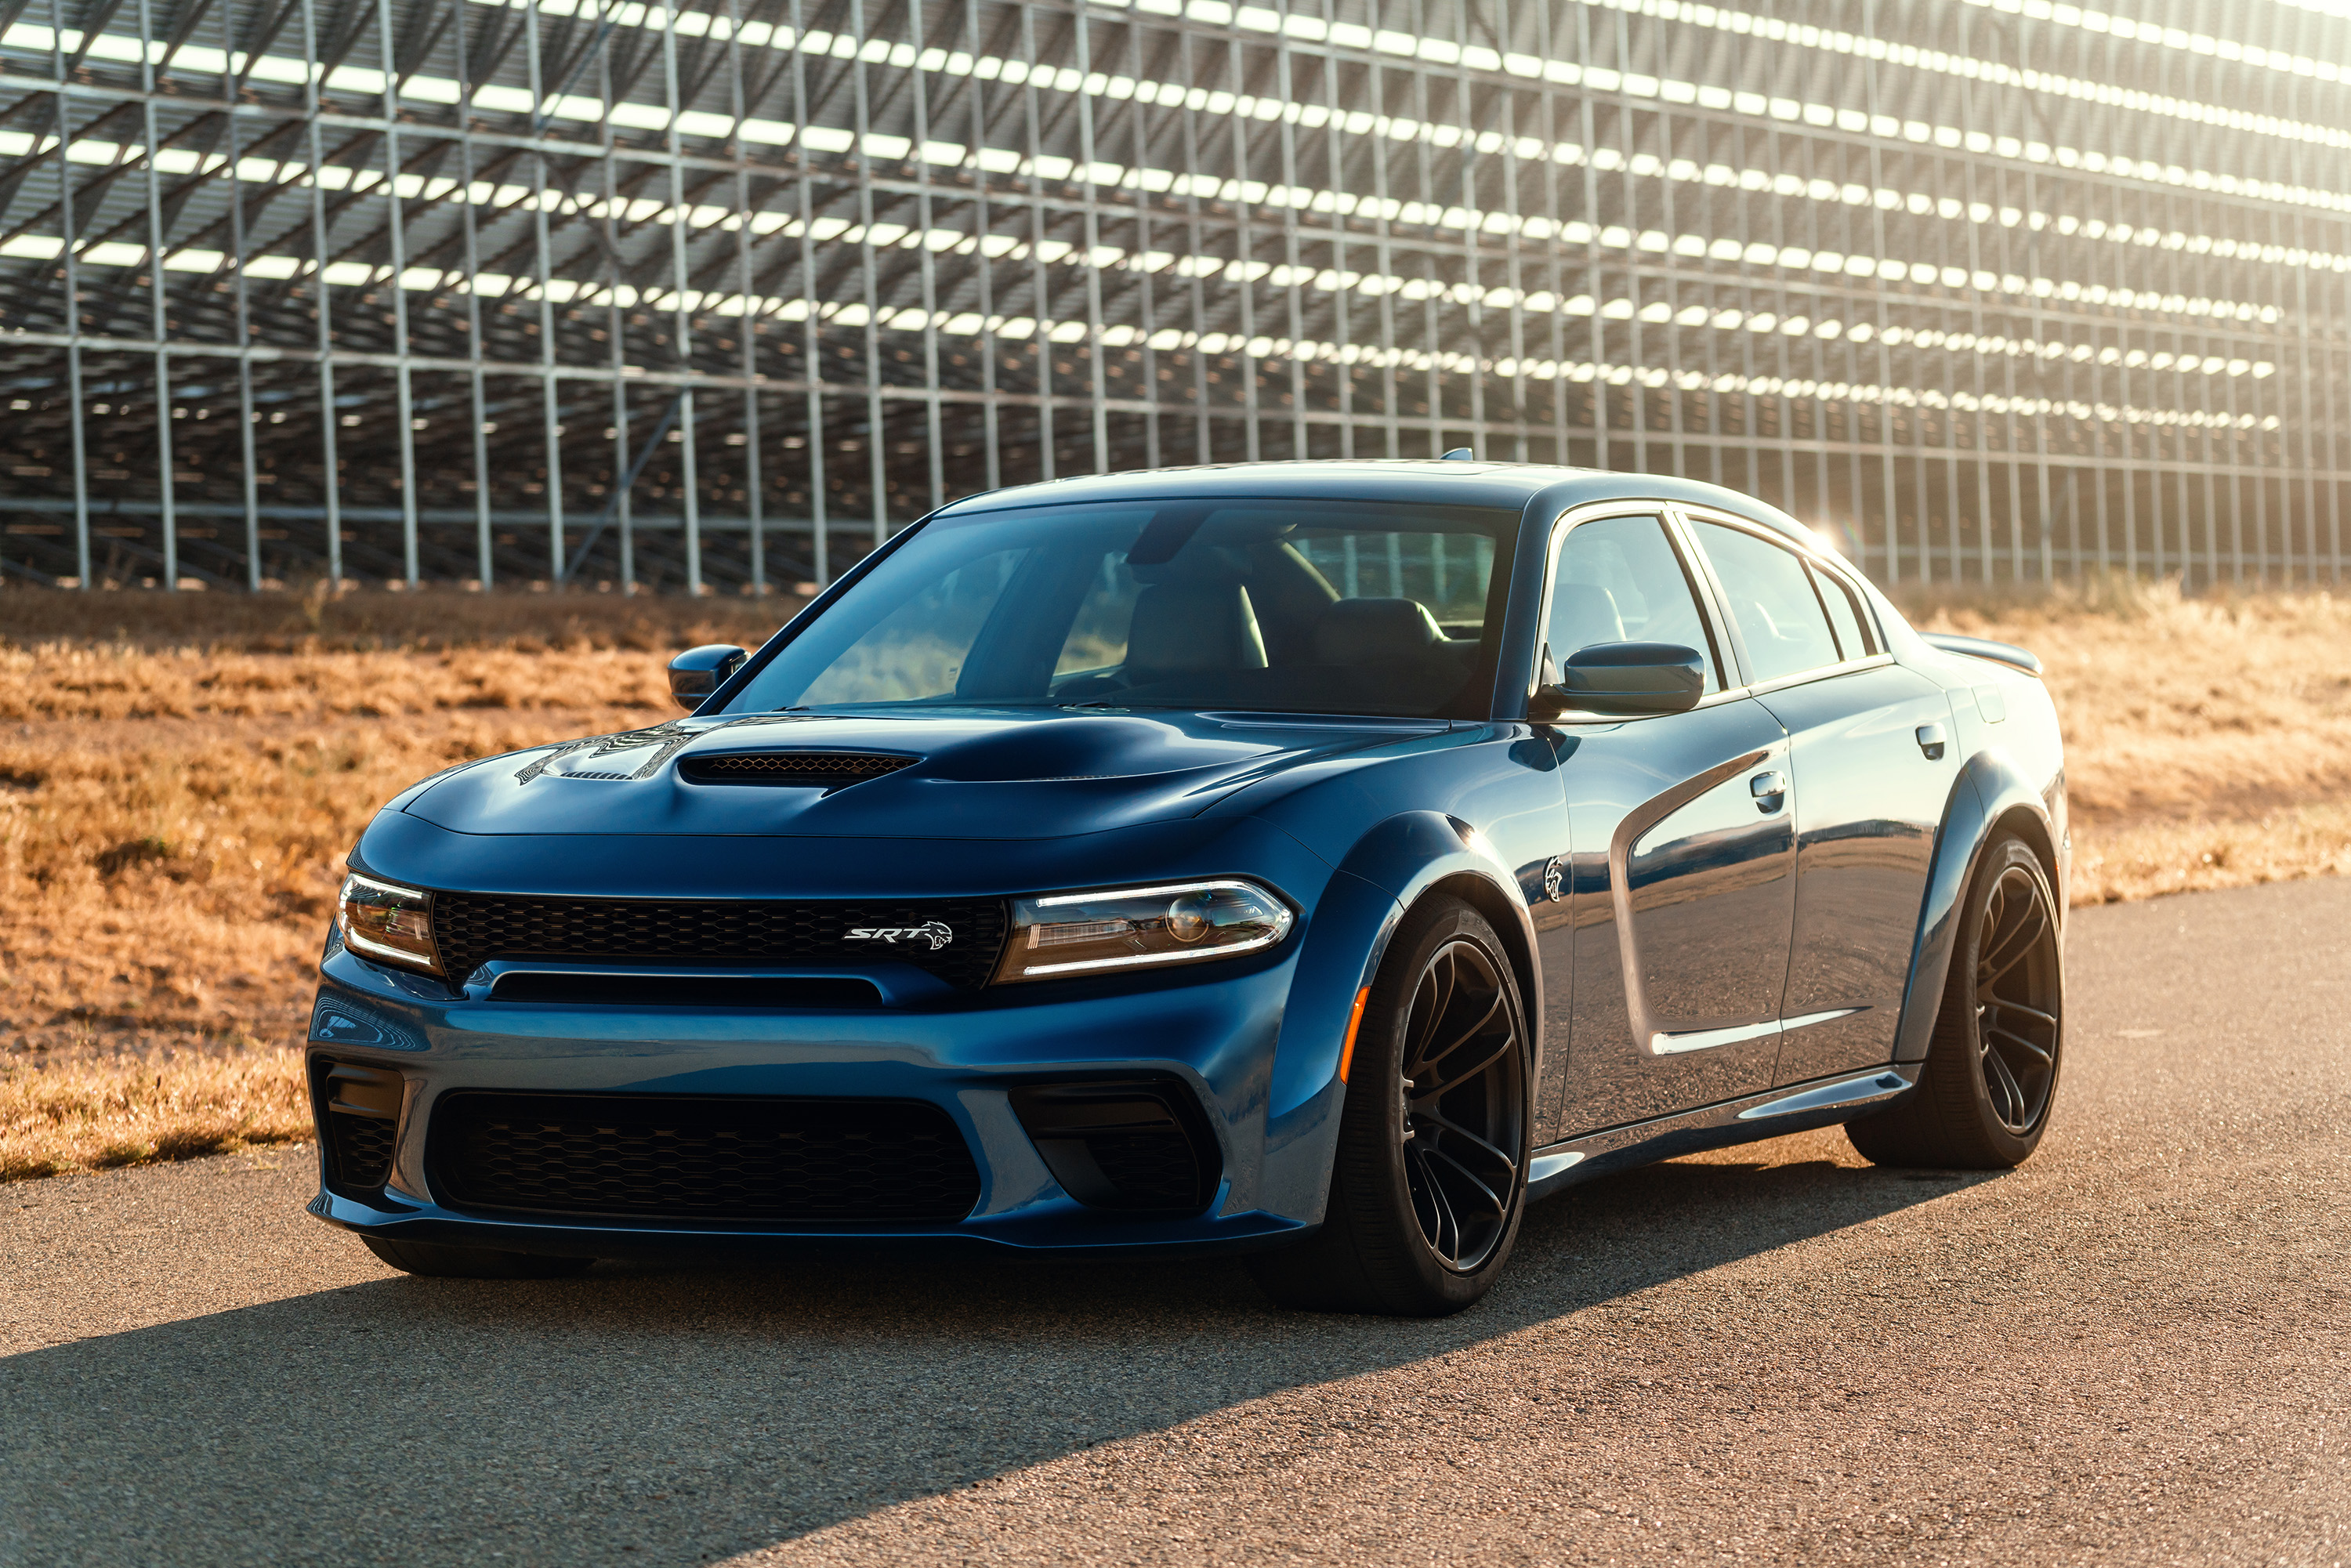 HD wallpaper The plane Dodge Charger Hellcat SRT 2020 Dodge Charger  SRT  Wallpaper Flare